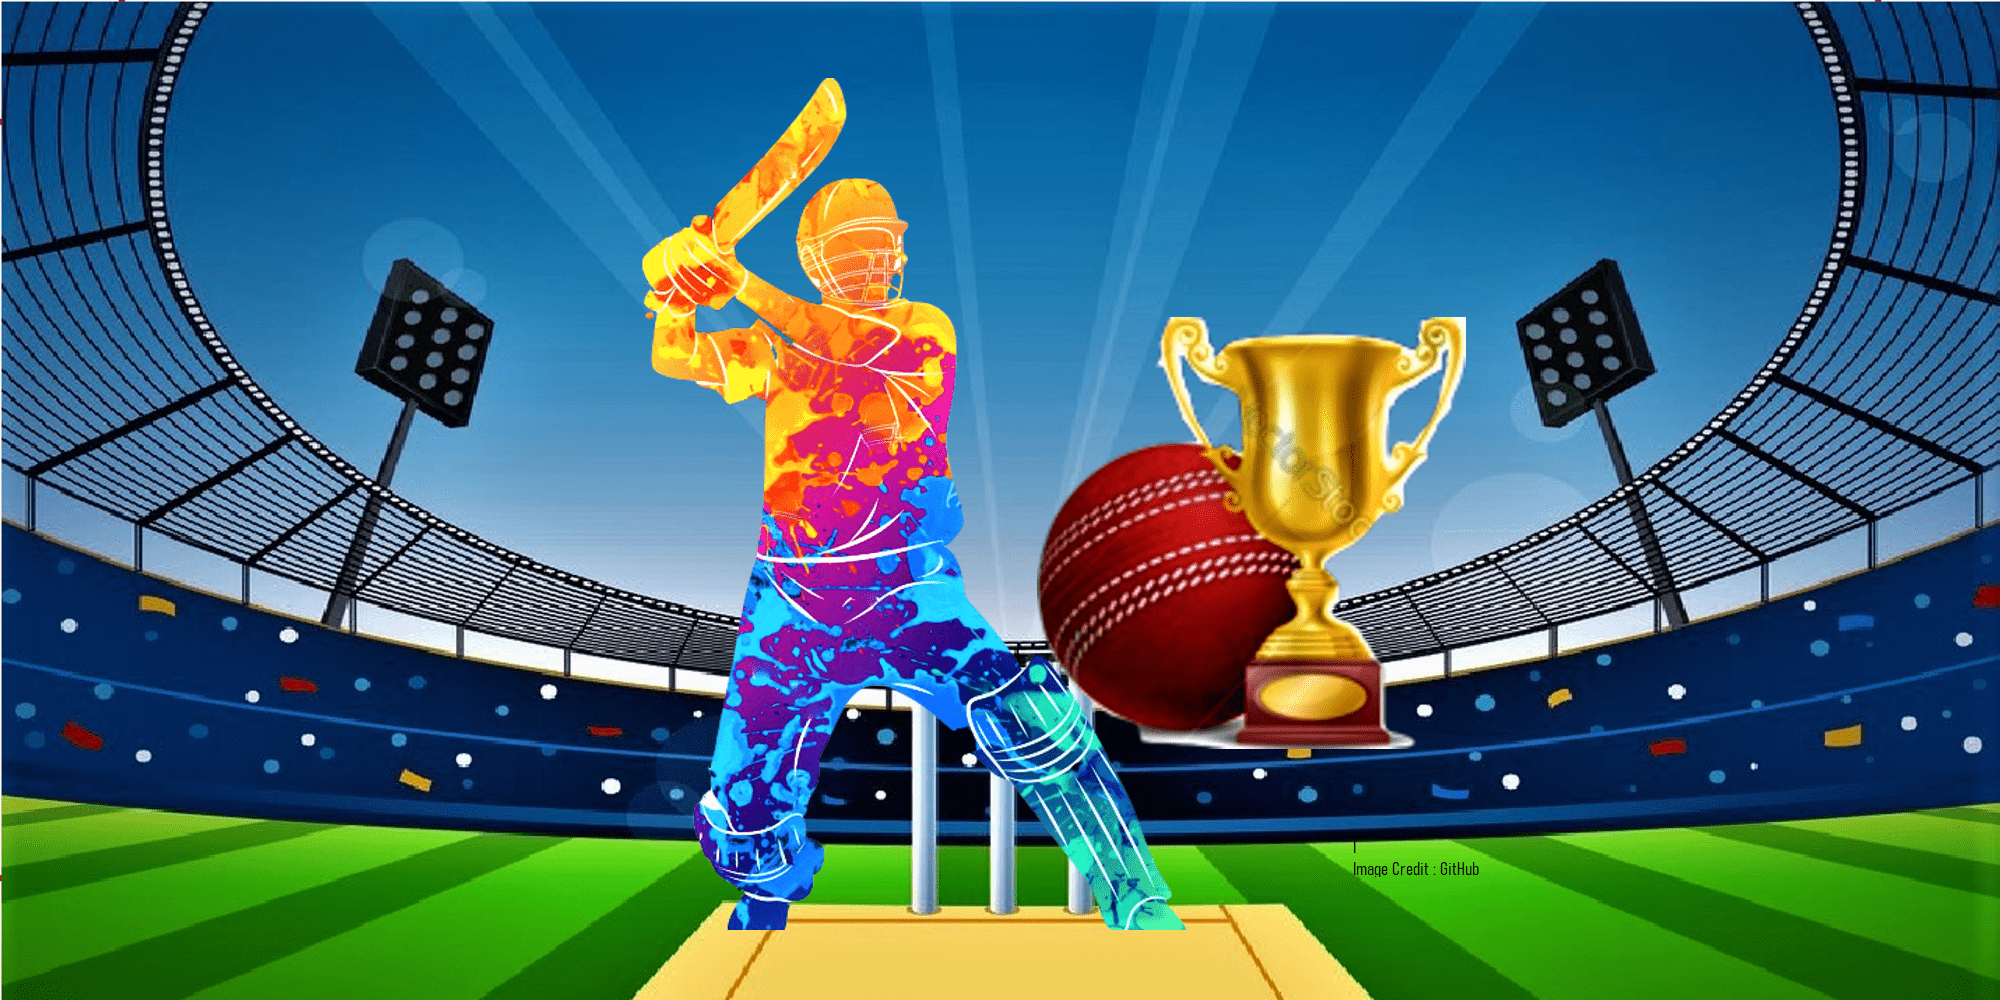 Why is fantasy cricket gaining popularity in India?